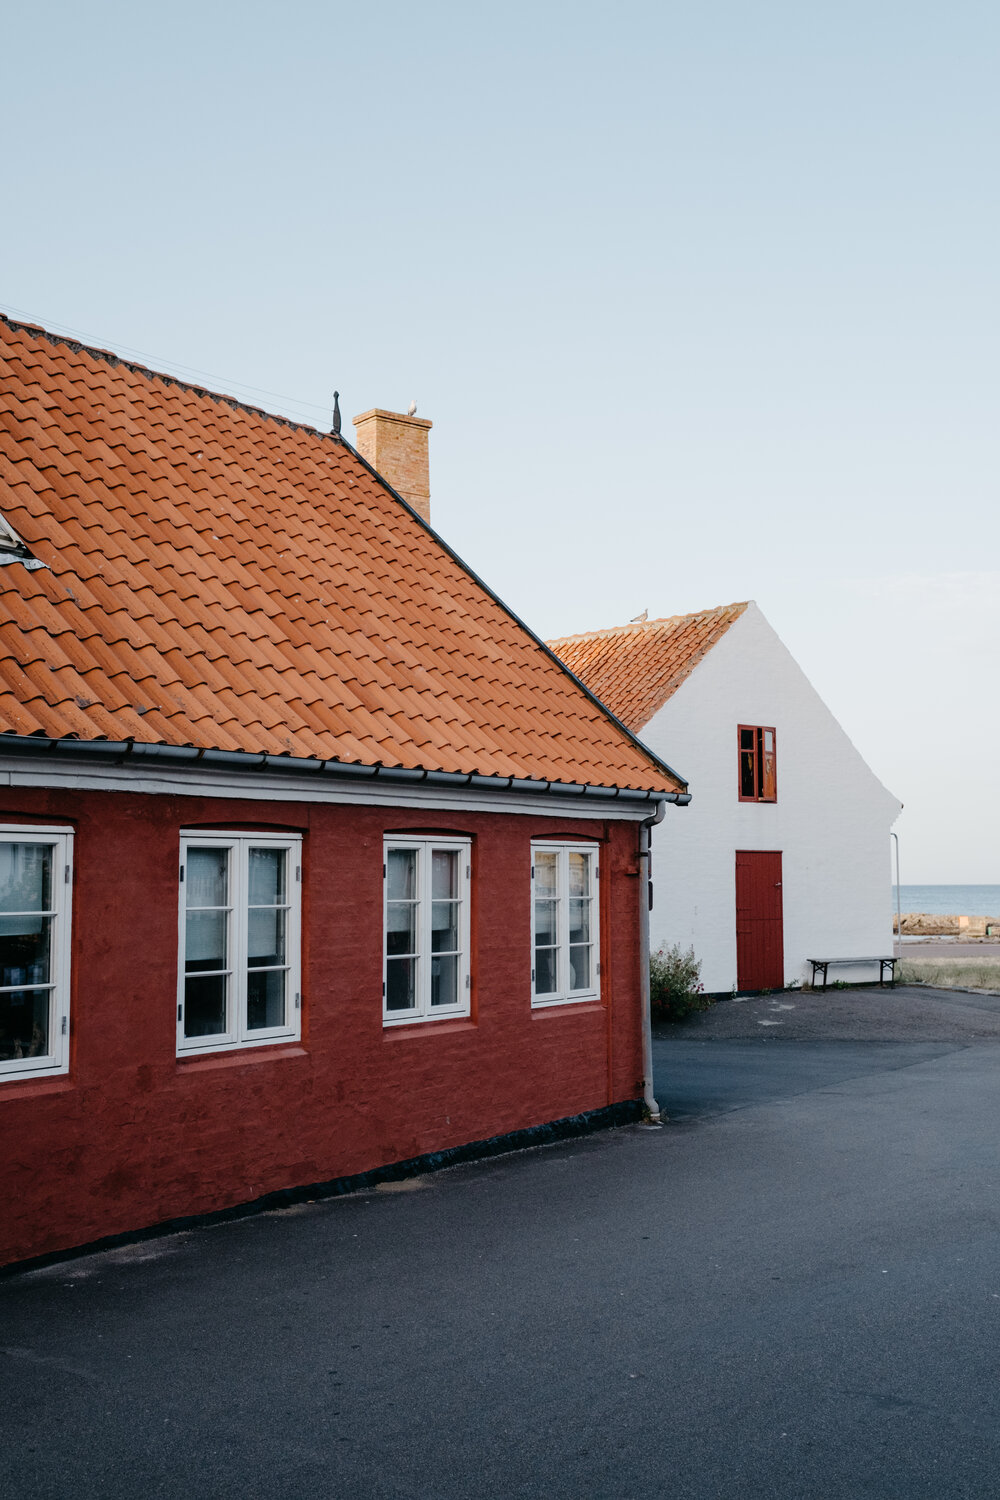 Red and white buildings with tile roofs outside of Copenhagen